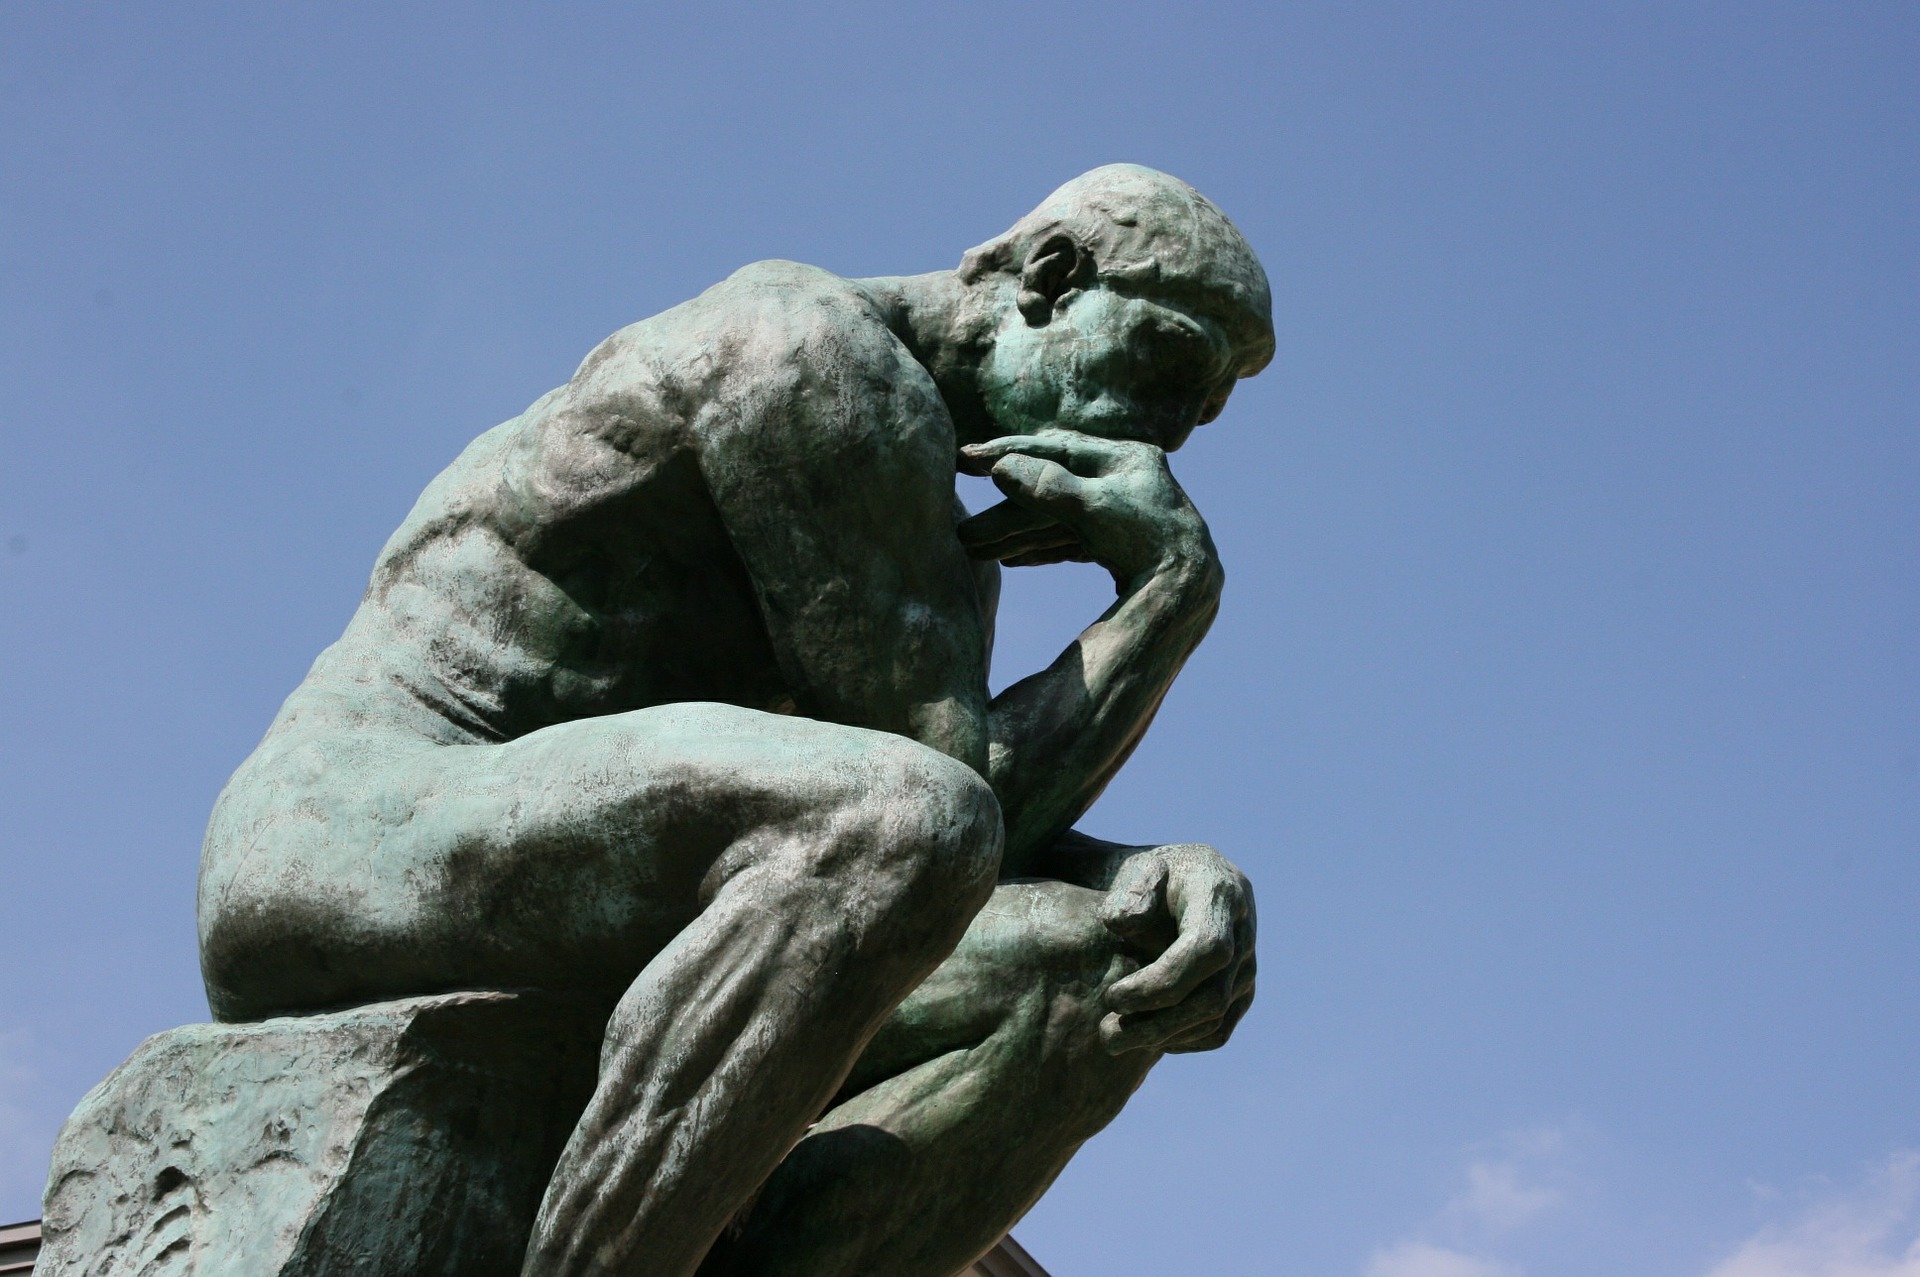 The Thinker sculpture by Rodin. Learn more about argument and critical thinking.